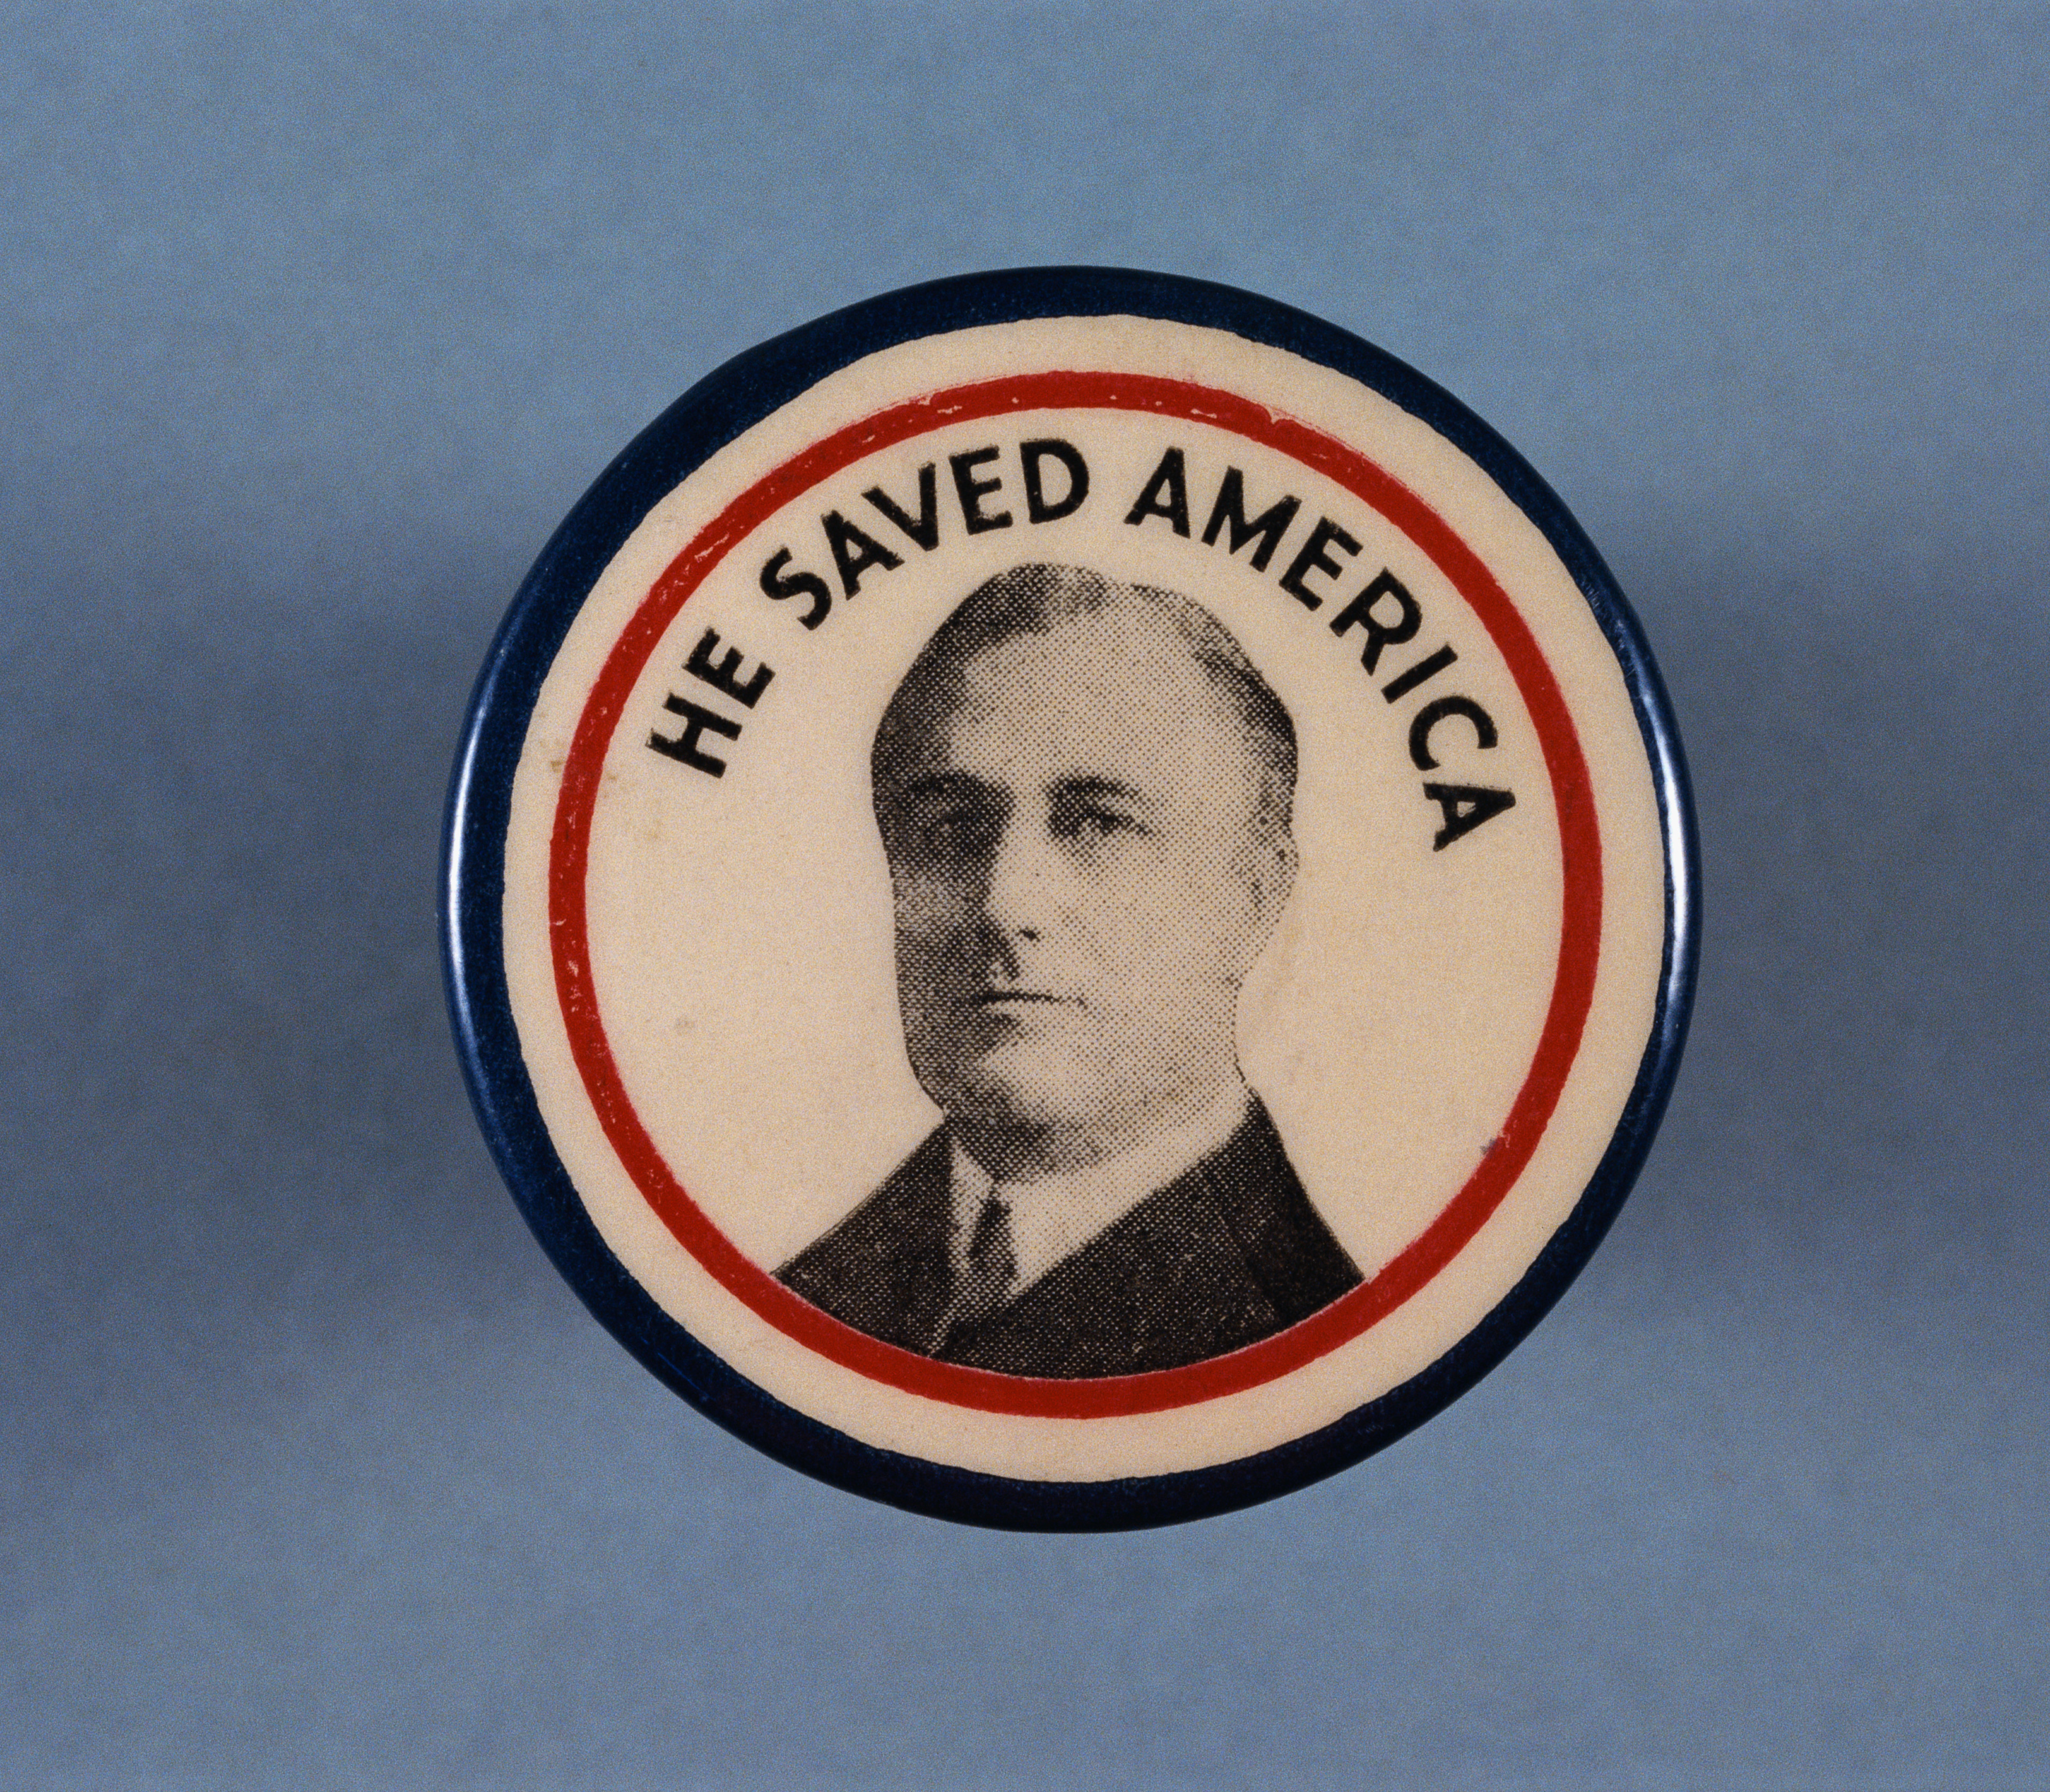 Franklin Delano Roosevelt&#039;s campaign button from the 1936 United States presidential election seems like it&#039;s from the much more distant past.